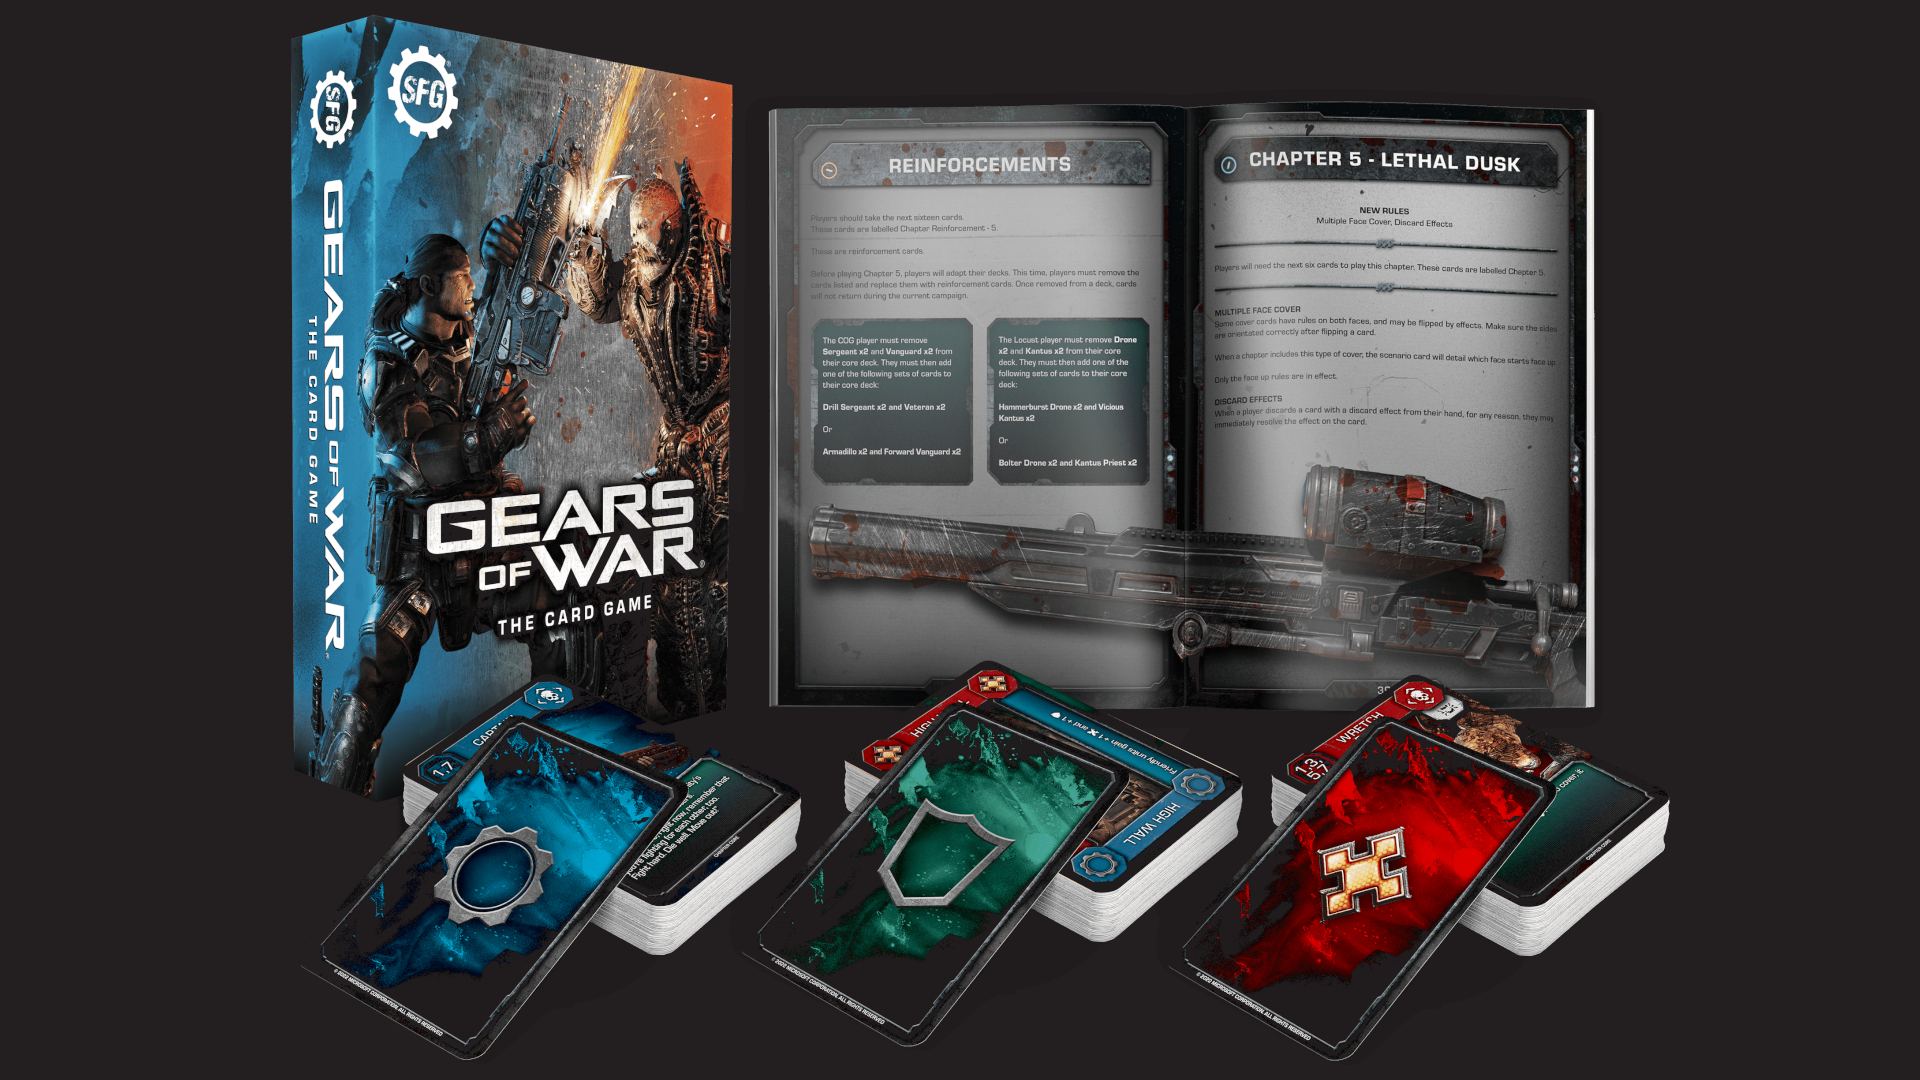  Gears of War 2: Game of the Year Edition : Microsoft  Corporation: Video Games